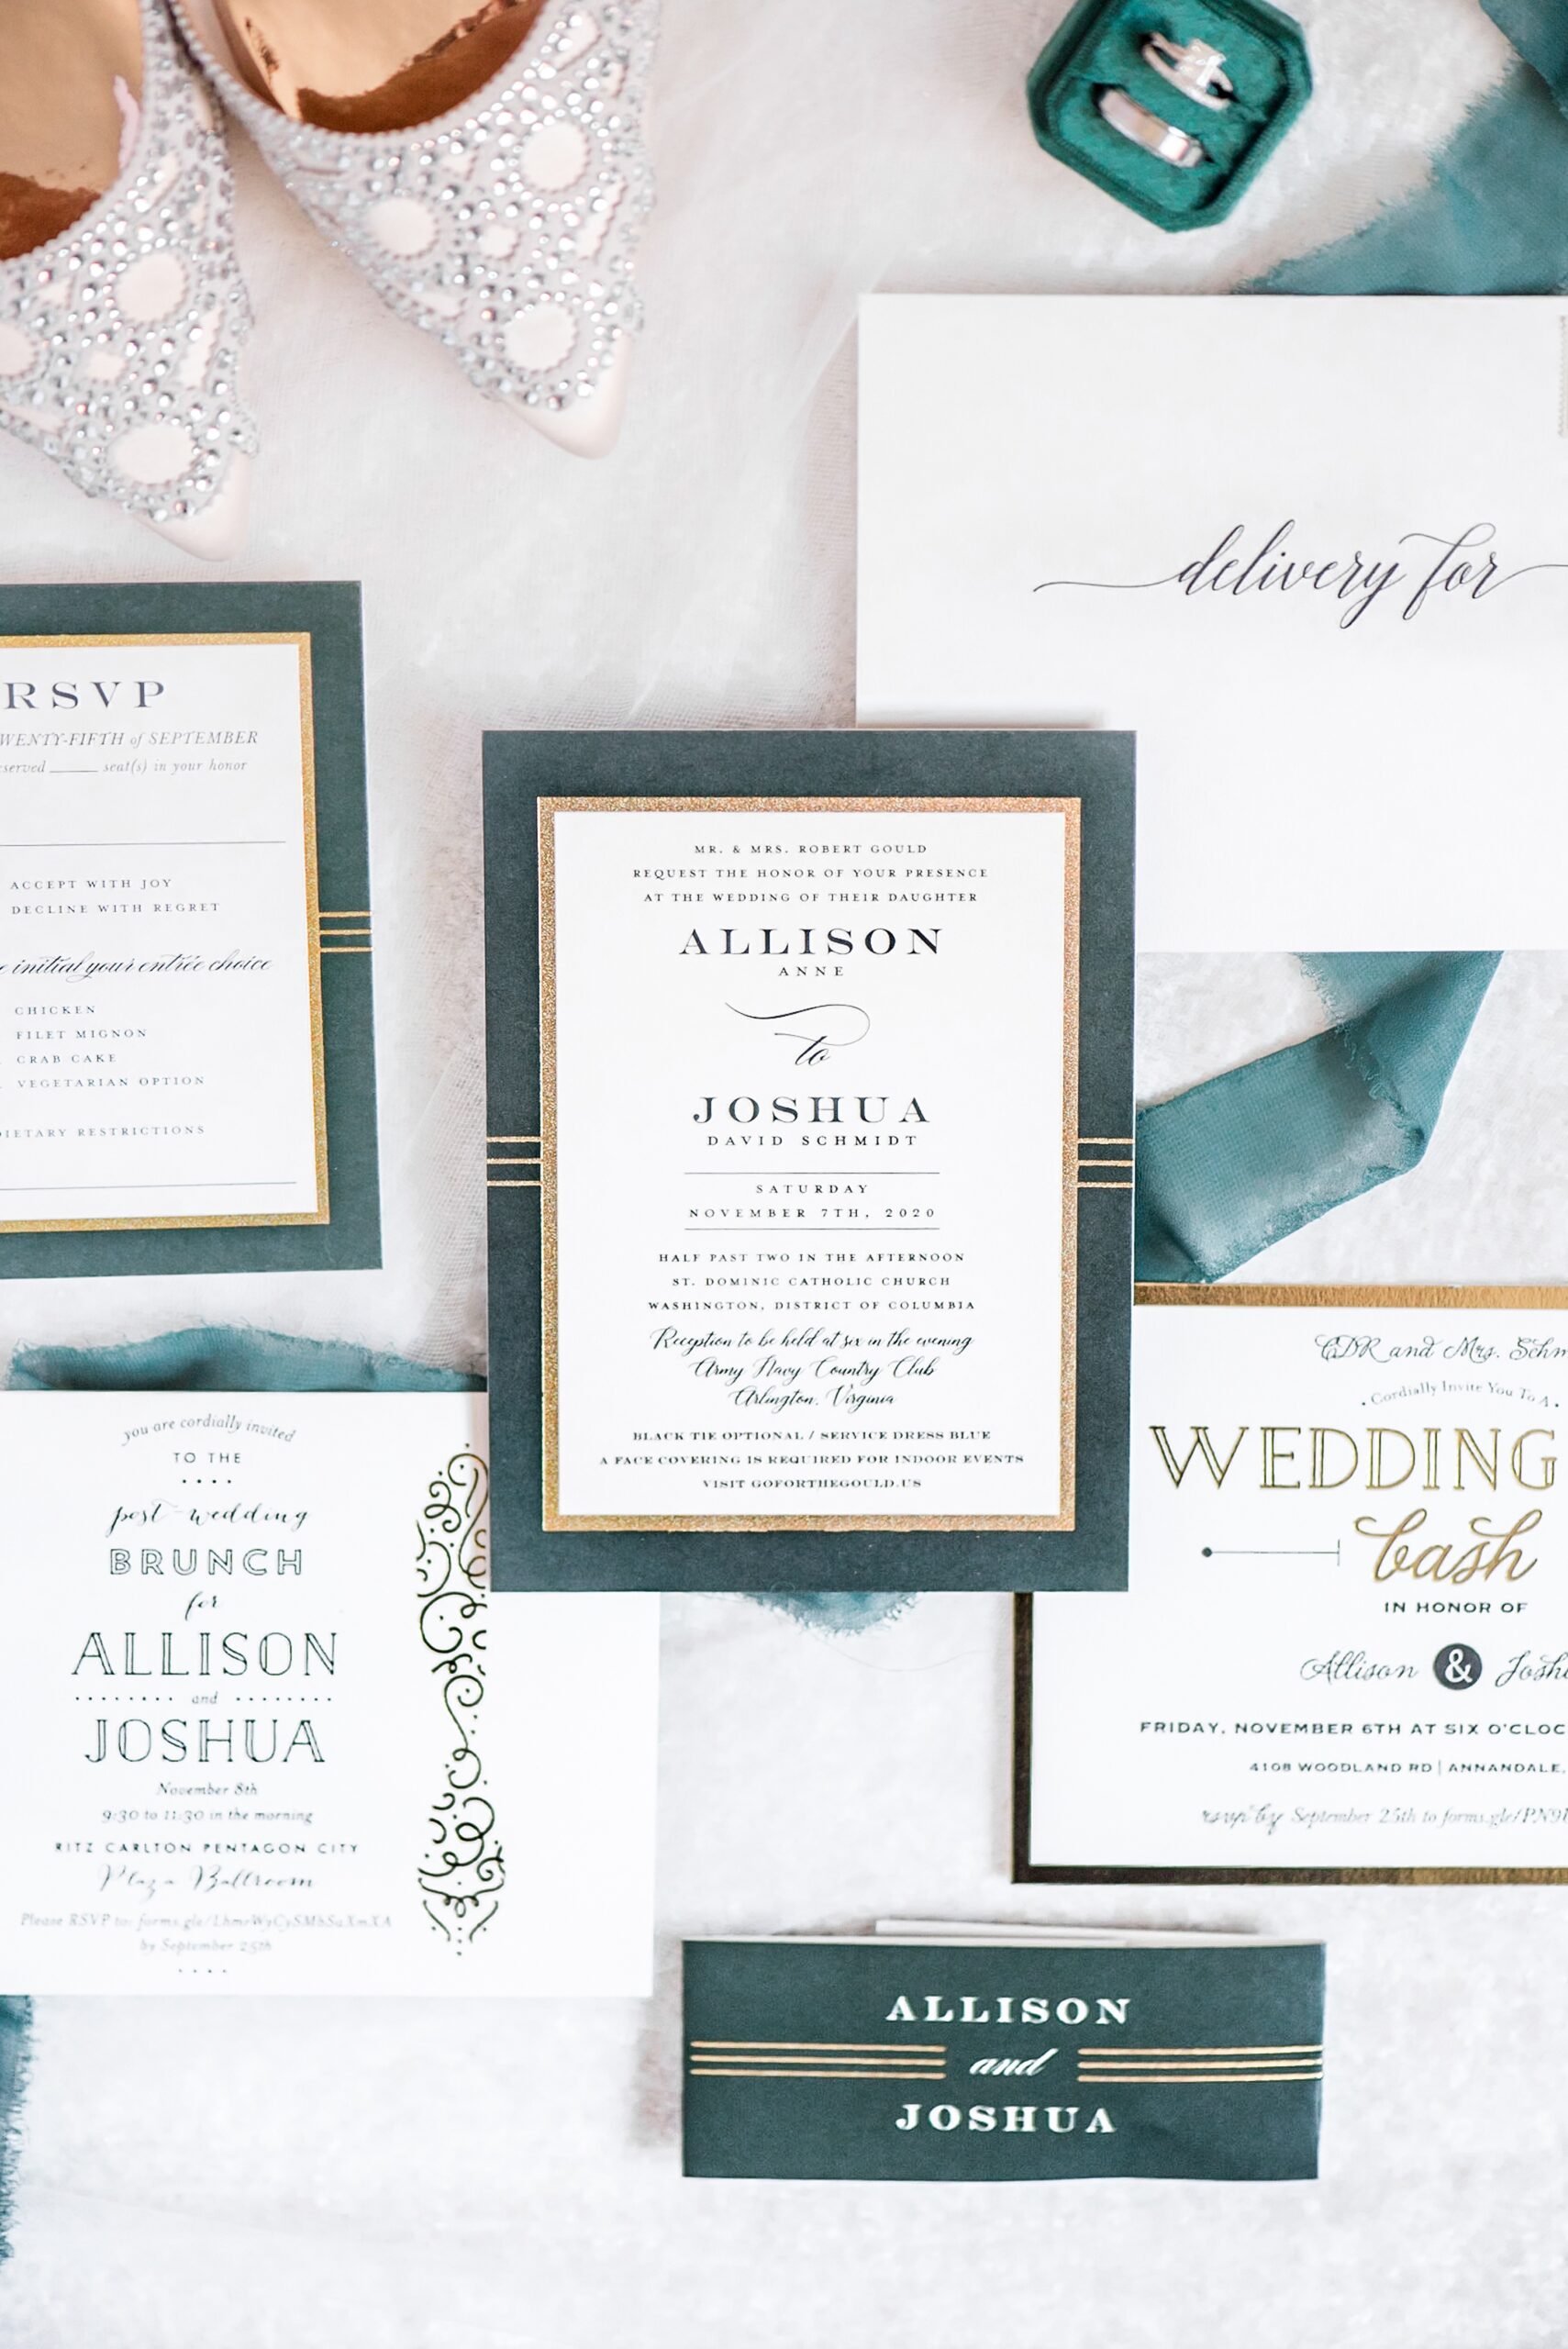 Details of wedding invitations and bridal details on a table with a green theme